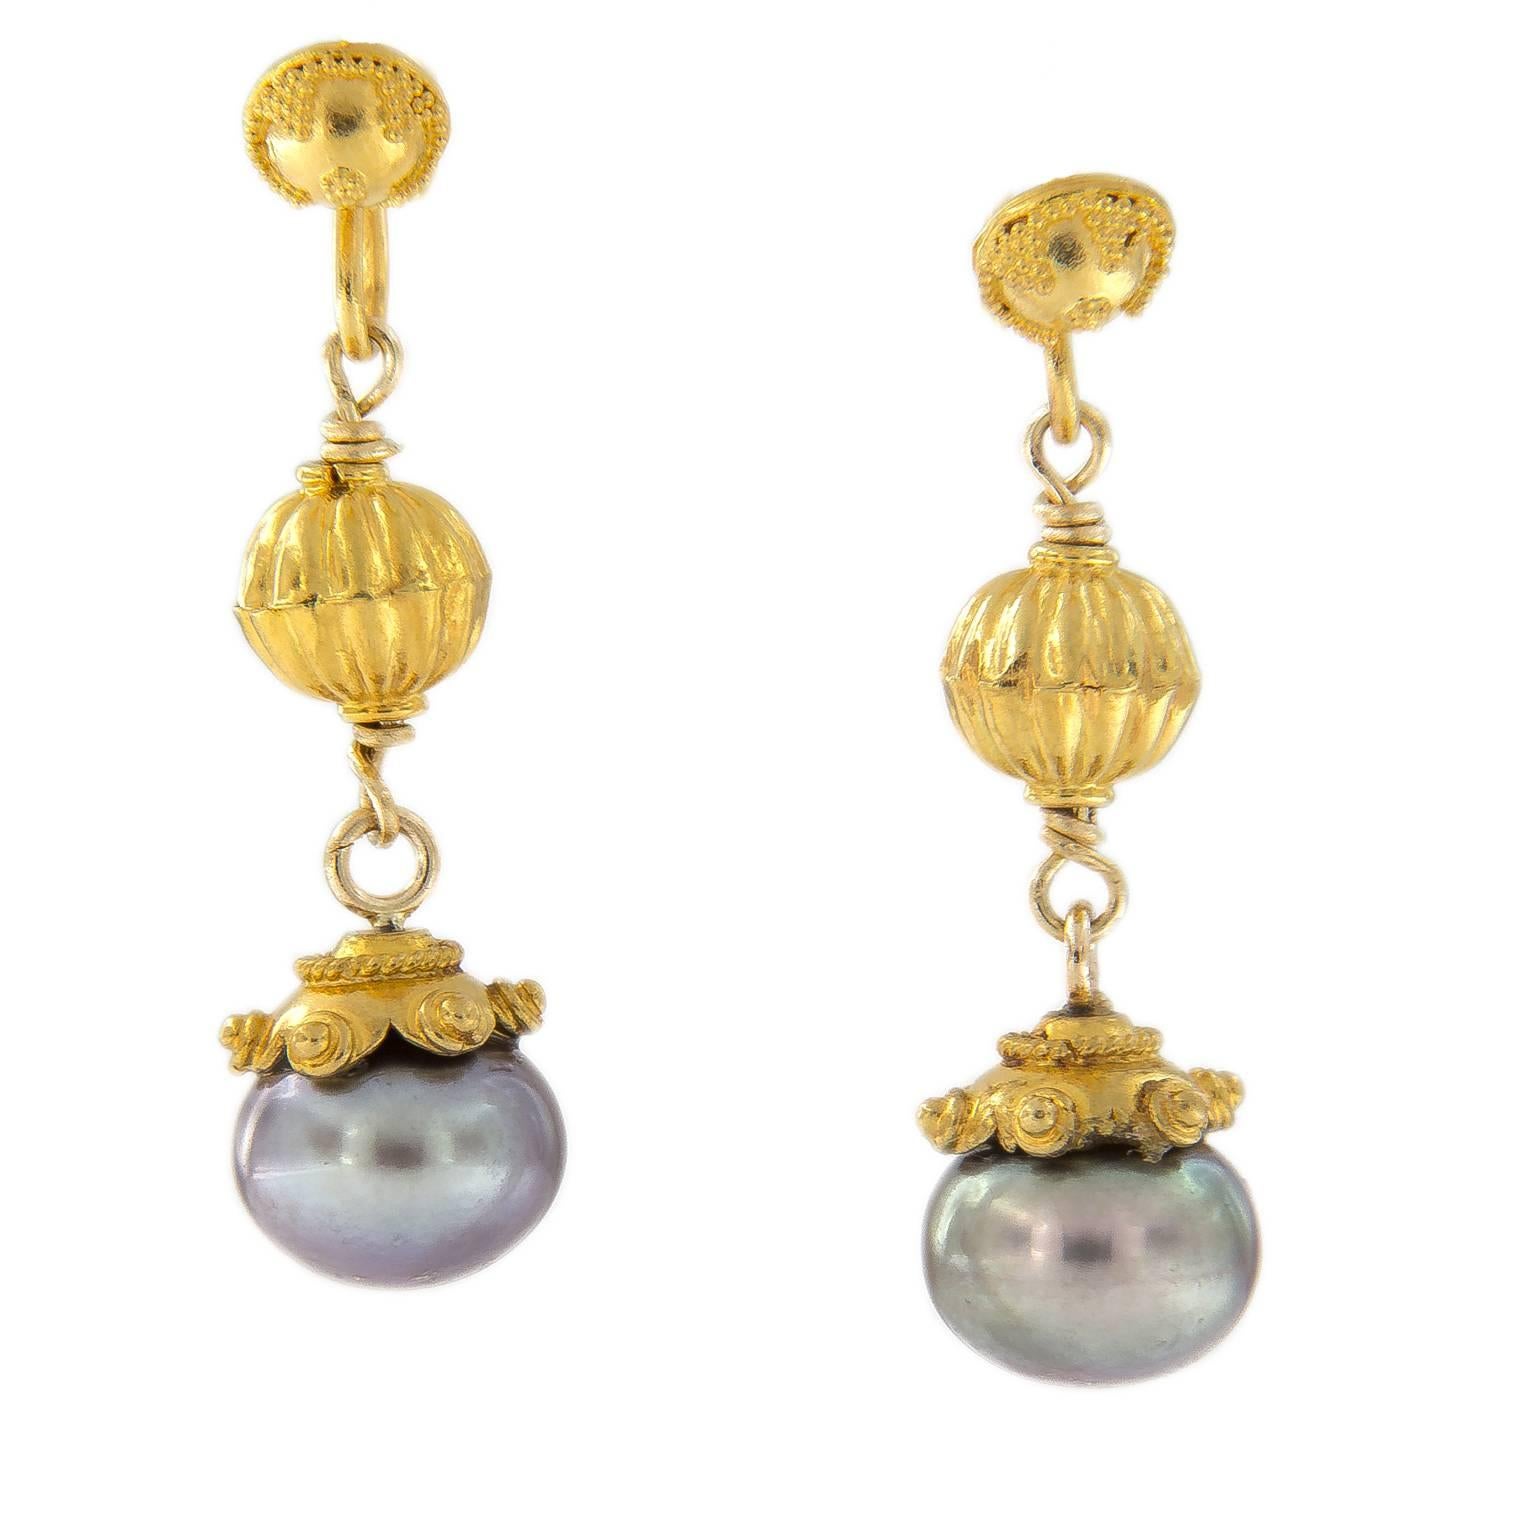 You’ll love the lustrous look of these freshwater cultured pearls. But what makes these pearls eye-catching is the ever changing shimmer of hints of green, blue, and gray with lovely detailed beads and caps. Earrings are hand-crafted in 22k and 18k